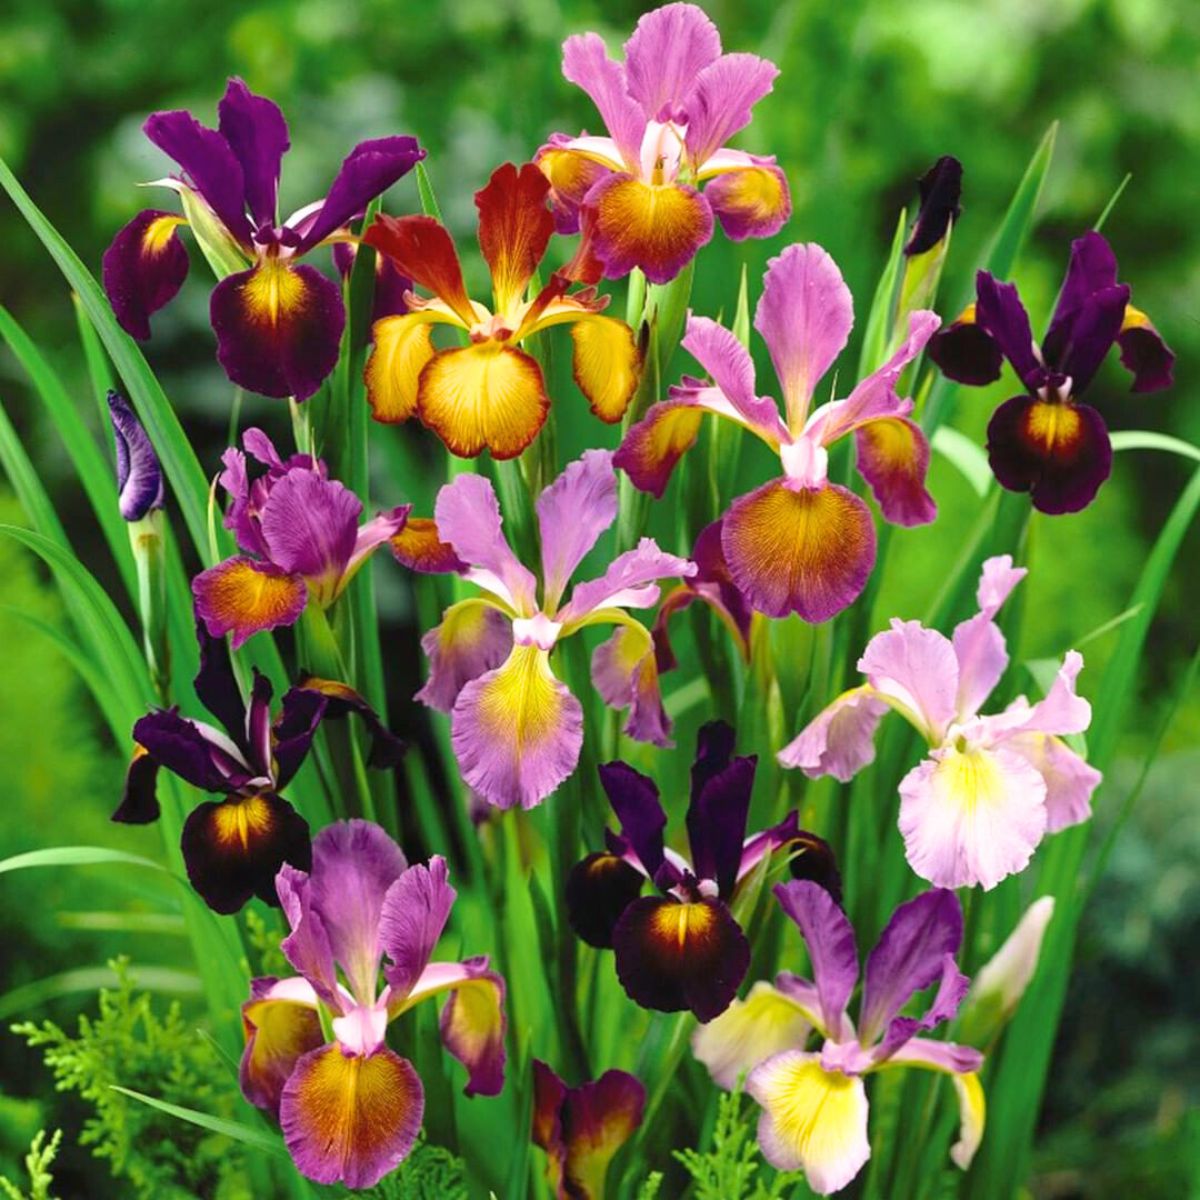 A bunch of colorful irises for National Iris Day